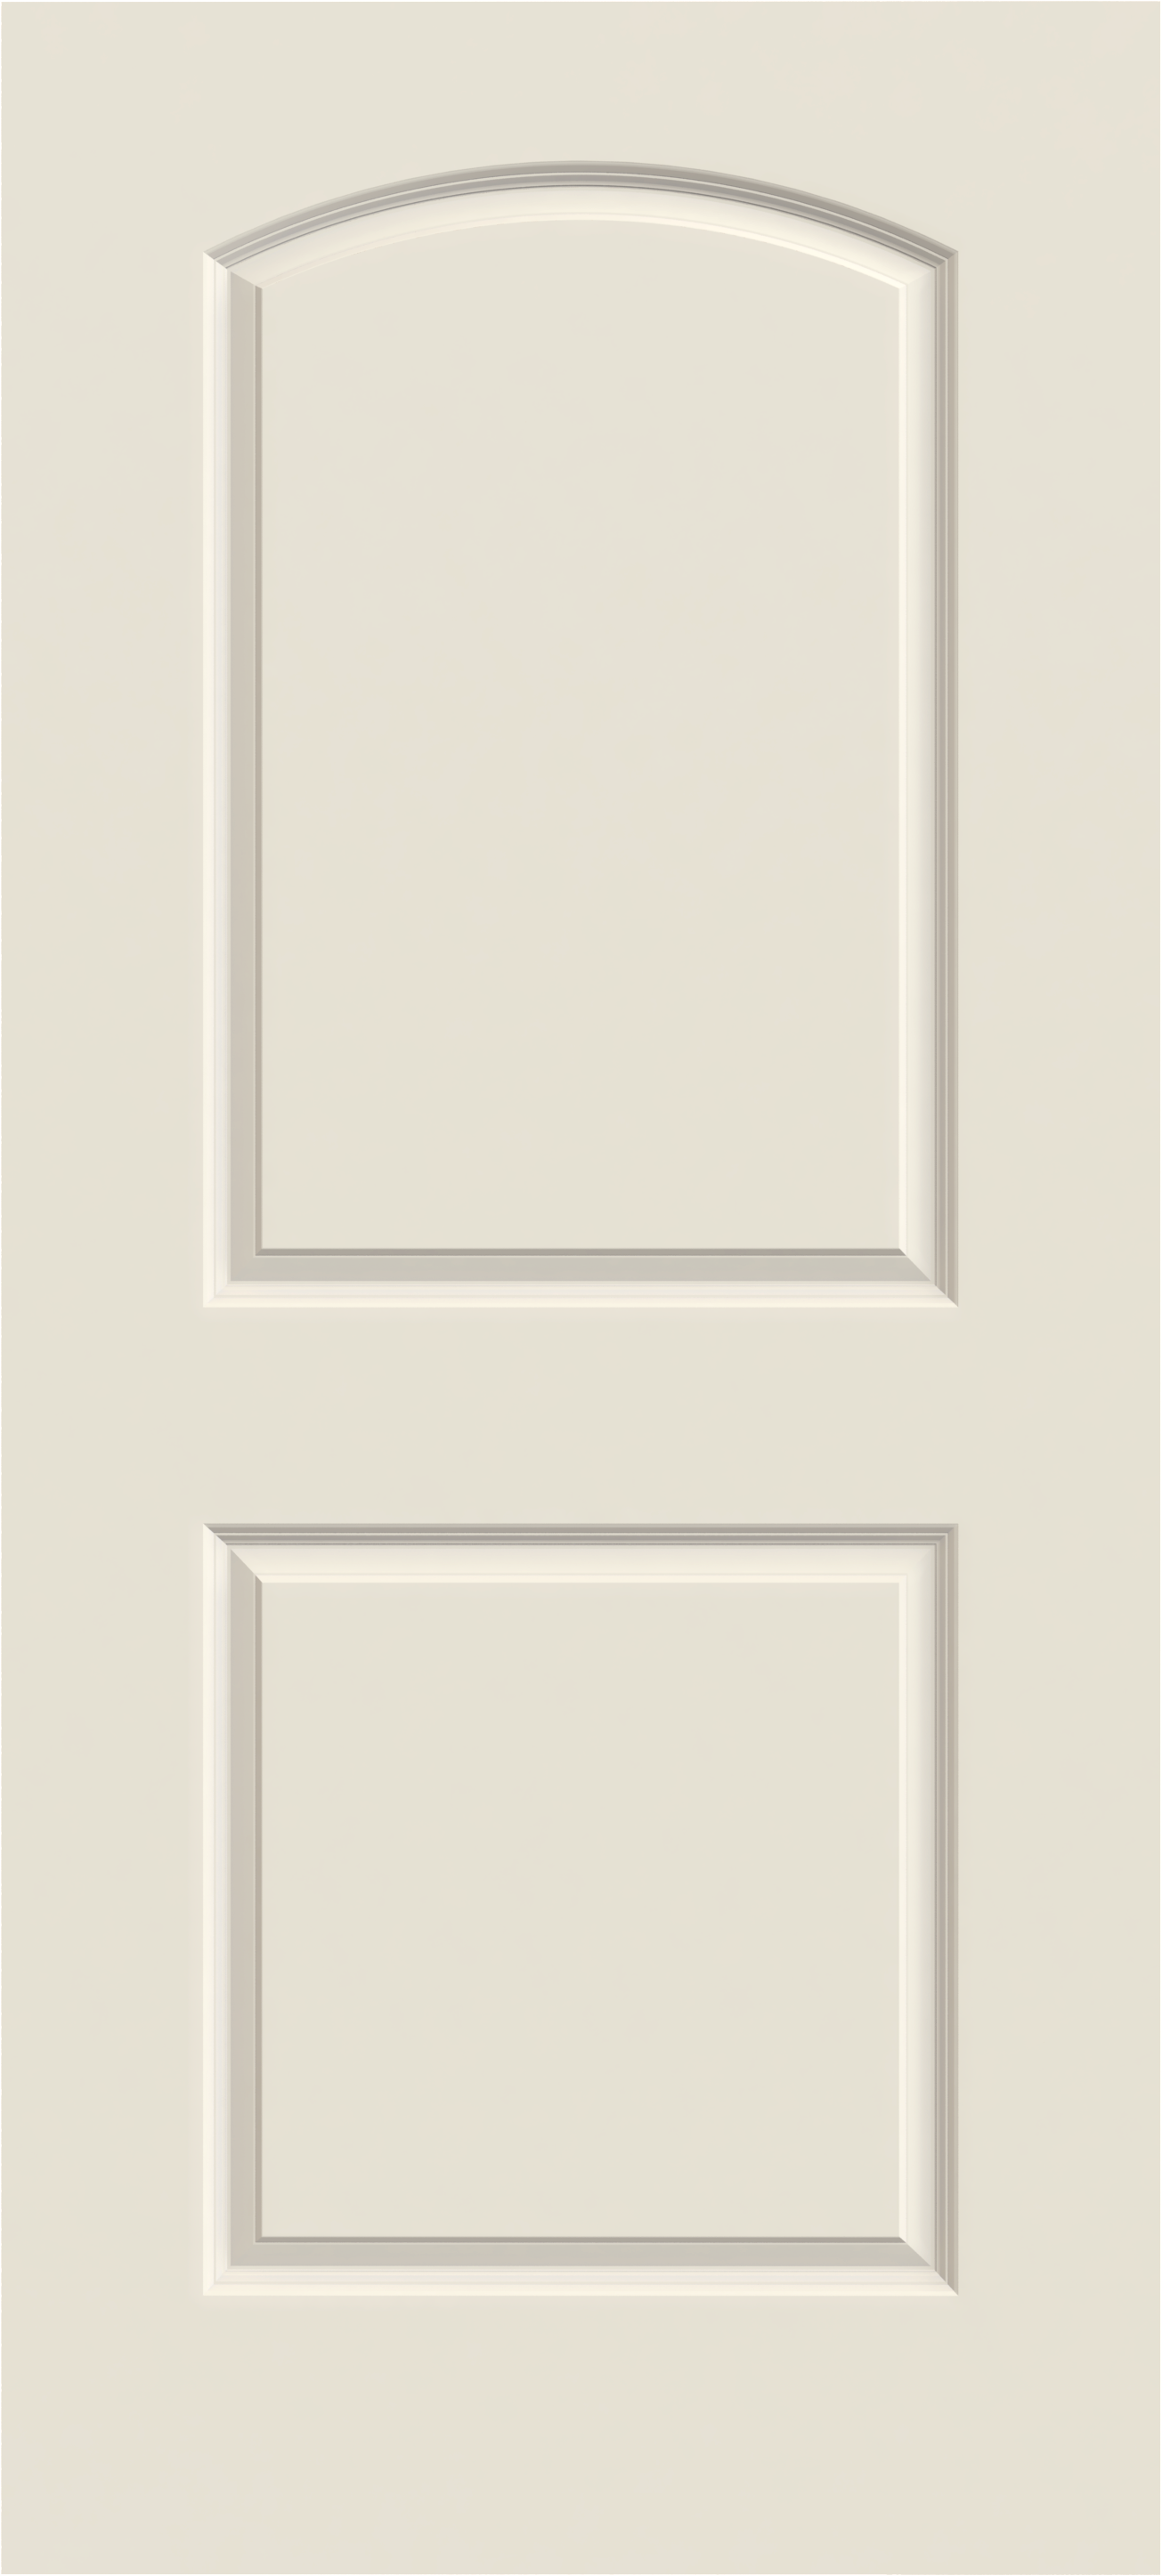 Interior Door Style - Caiman Smooth, Molded Wood Composite All Panel ...